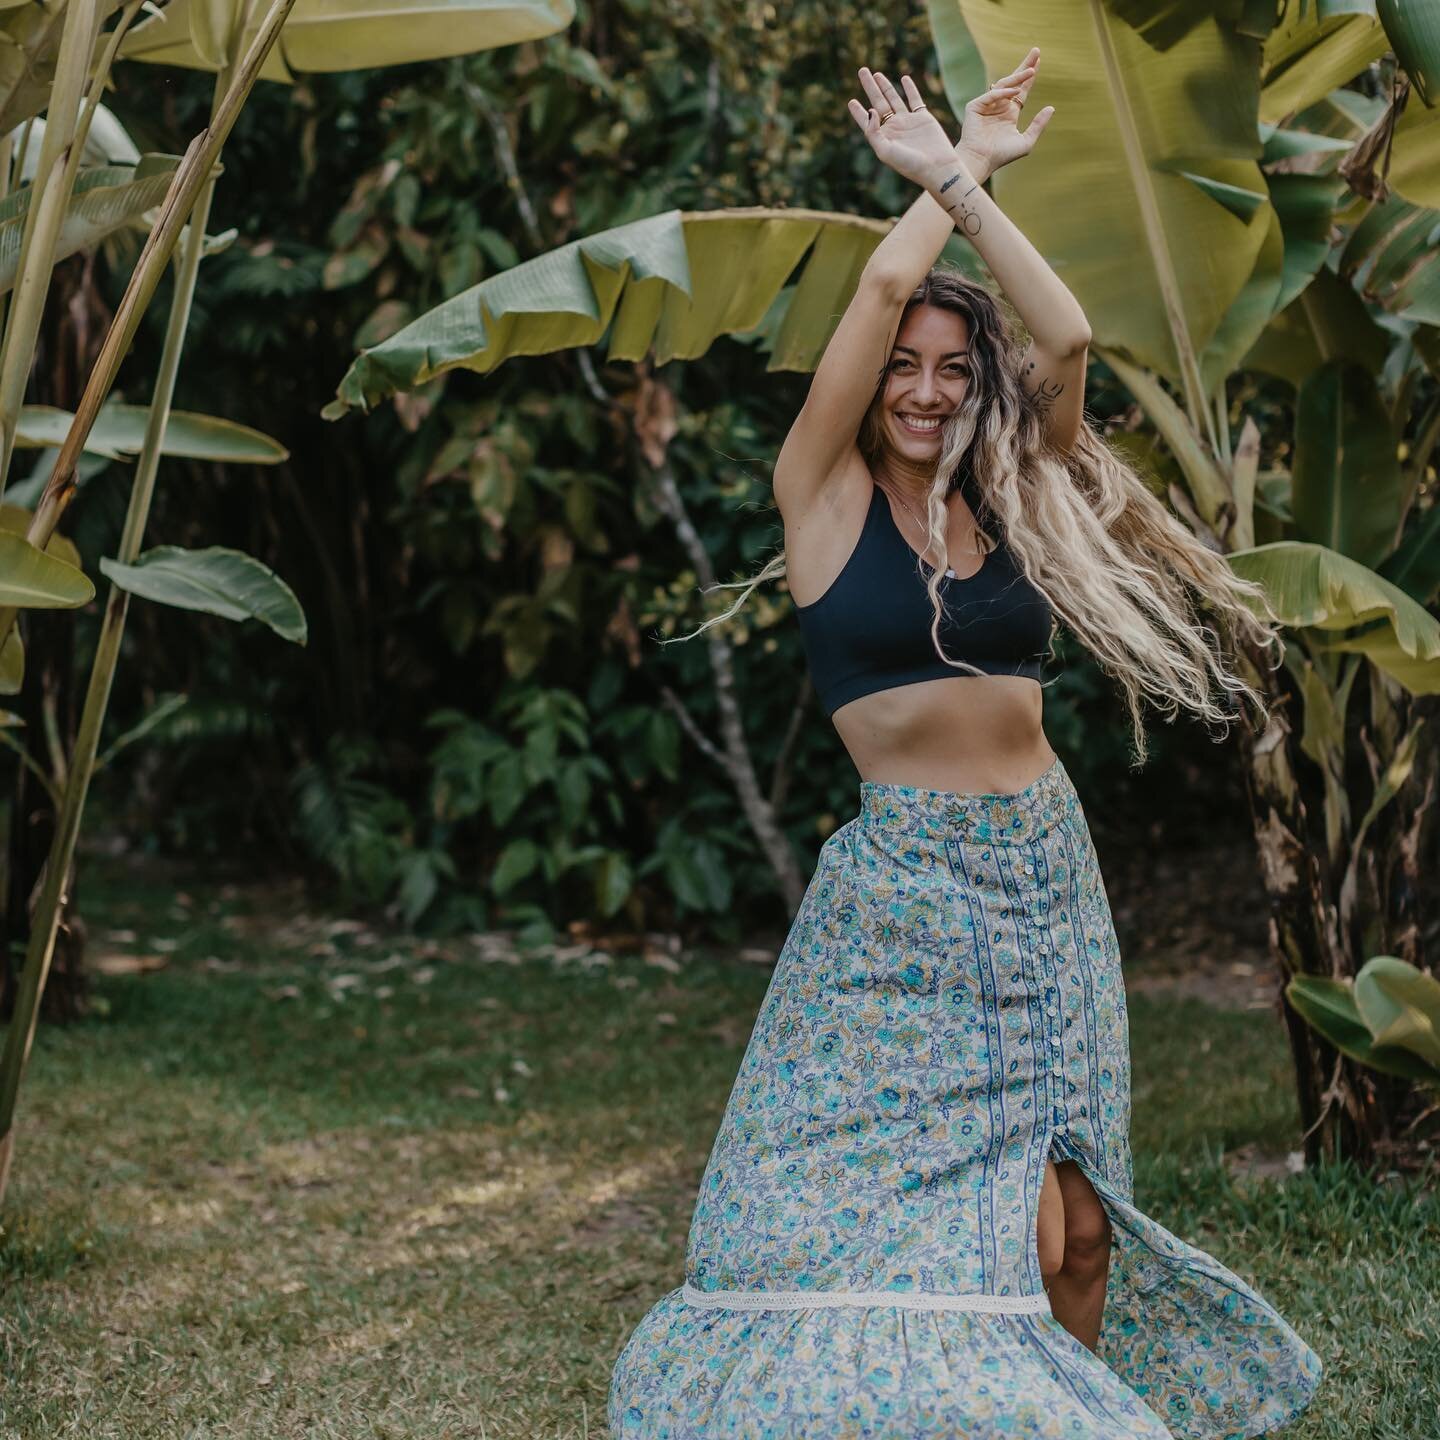 &bull; a joyful life &bull; 

The past 8 years of my life have been a cleanse of my physical and emotional bodies, detox from modern society, deprogramming all my limited beliefs, learning what it means to live a good SLOW life and figuring out how t